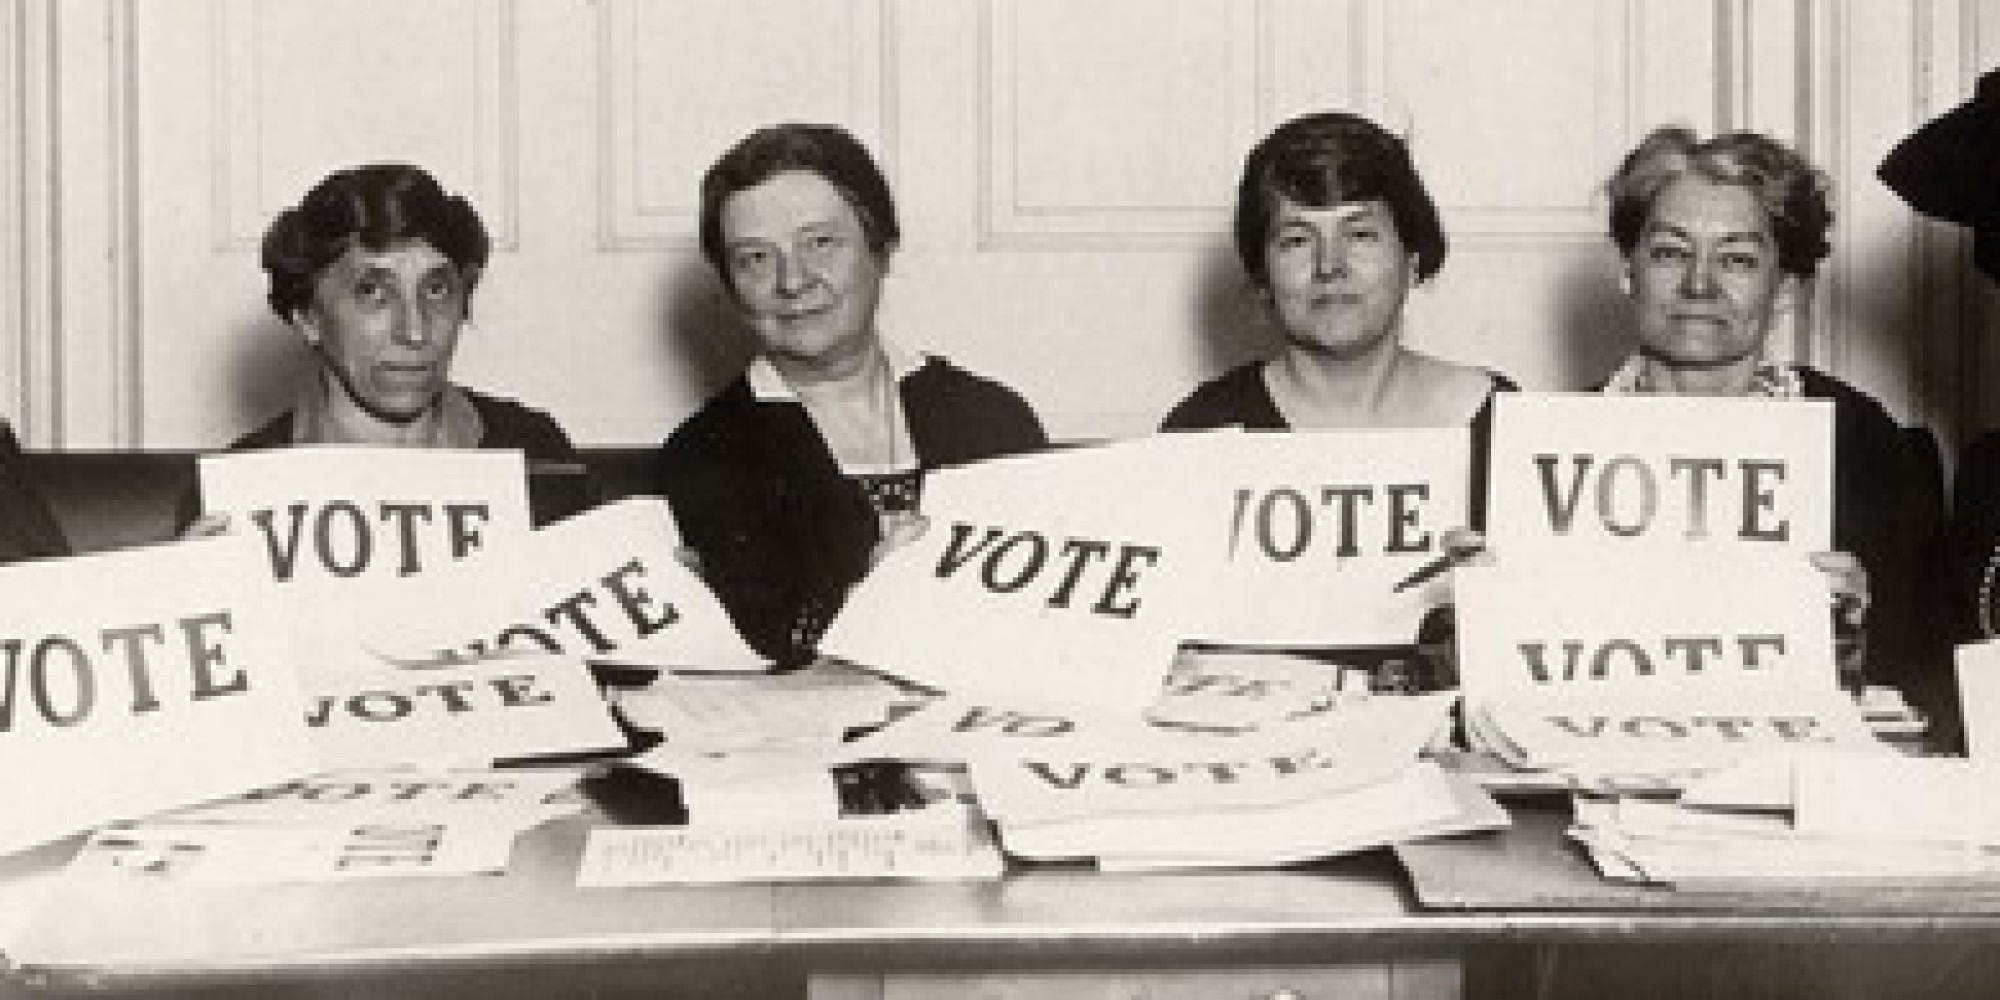 C votes. Right to vote. Fight for vote women. Women gaining the right to vote in 1920.